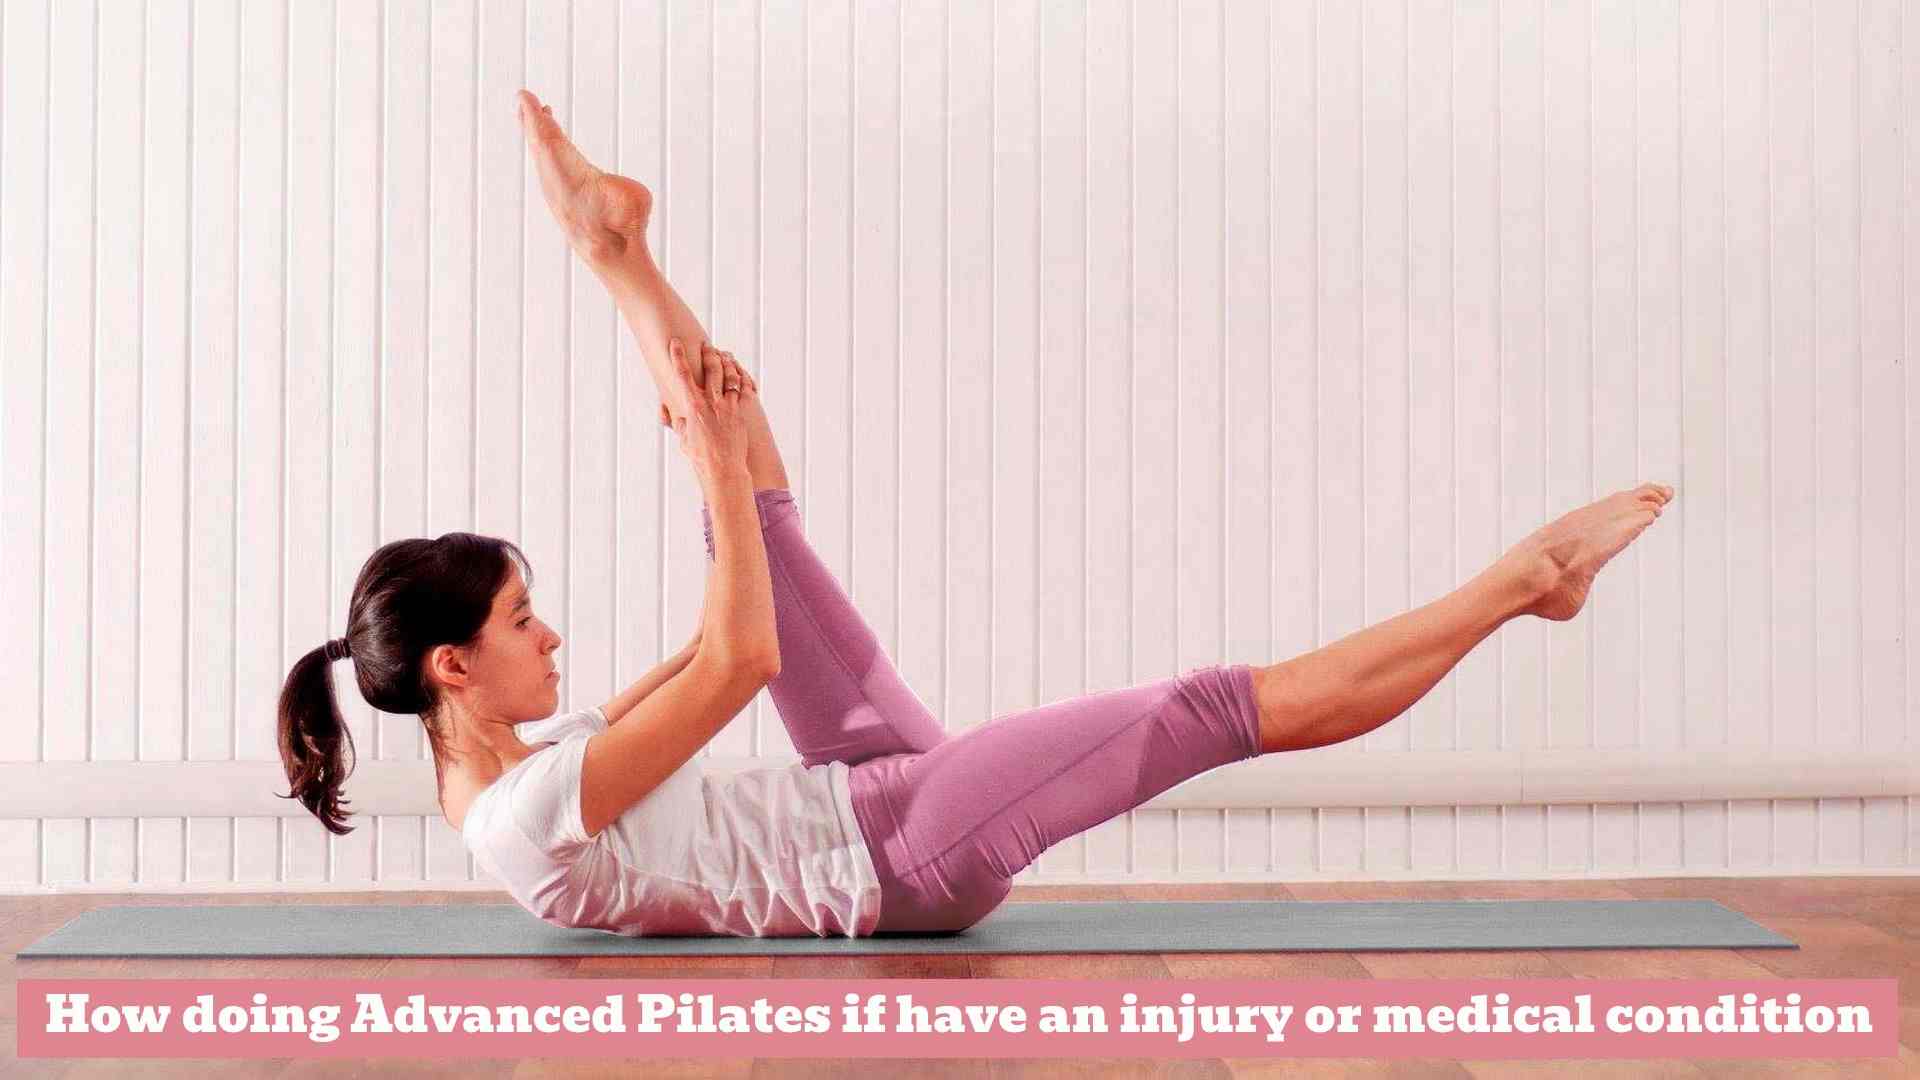 Difference Between Beginner and Intermediate Pilates?